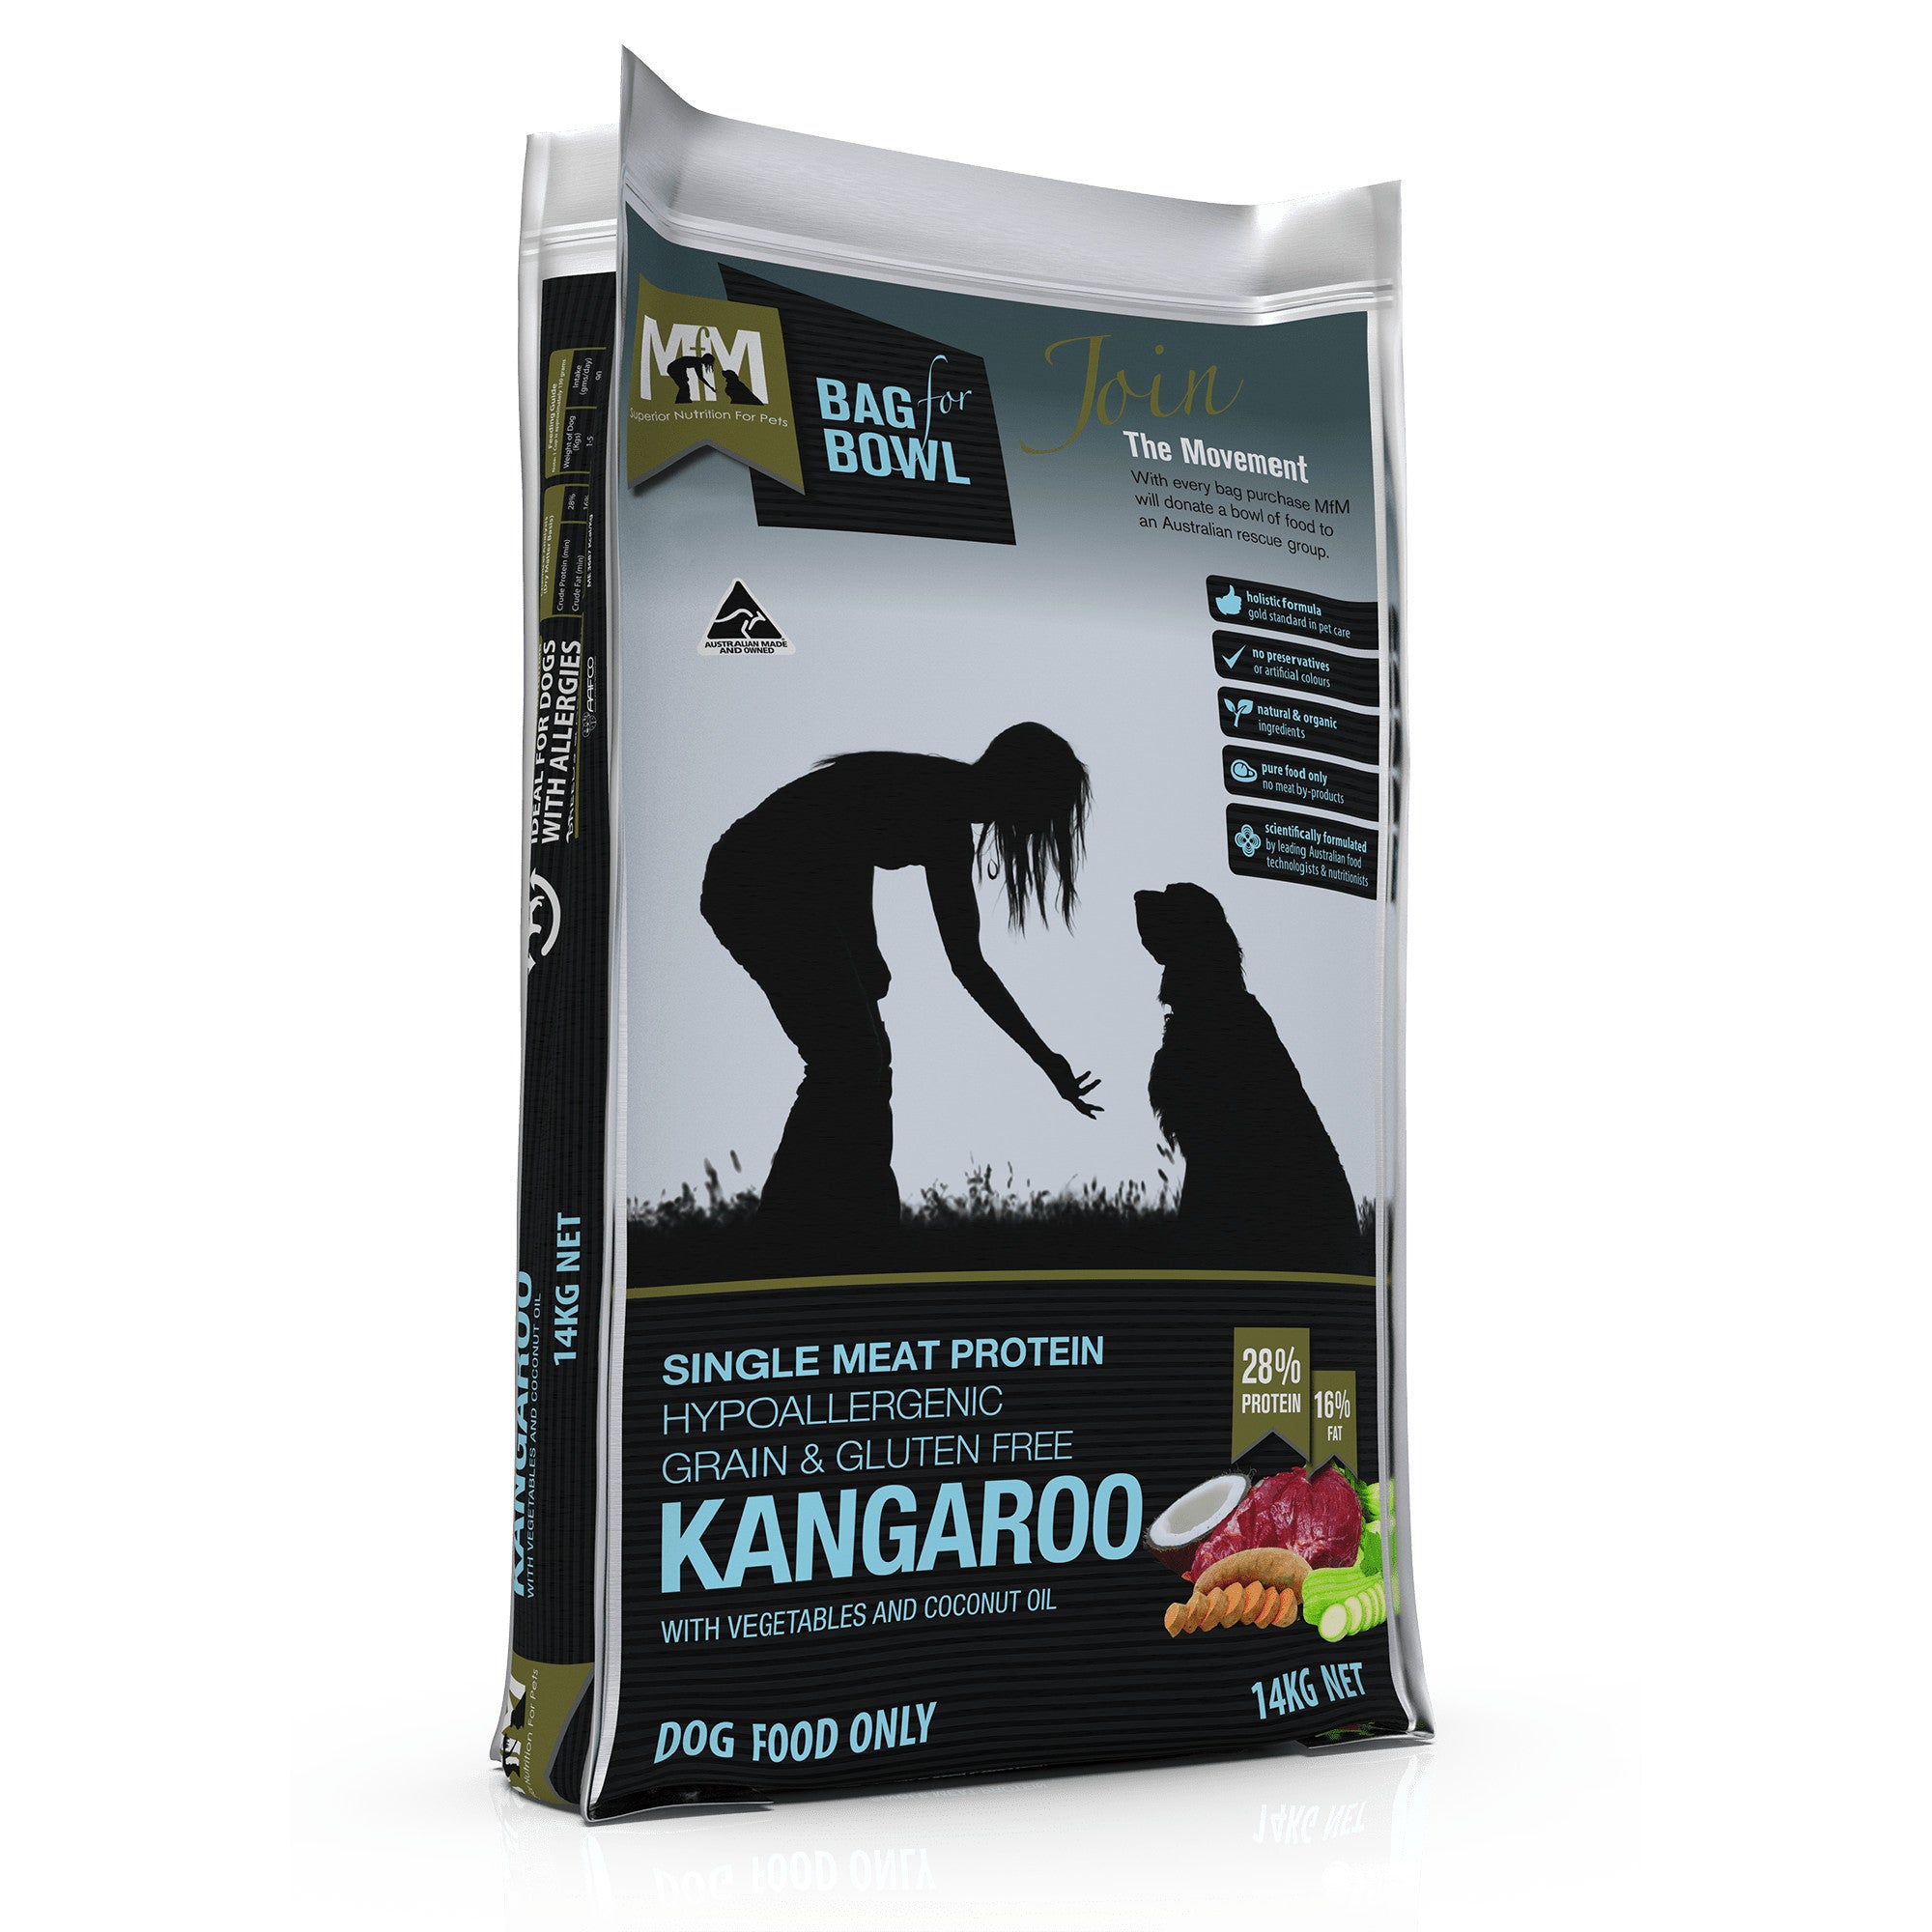 Meals for Mutts Kangaroo Single Meat Protein Dog Food 14kg.